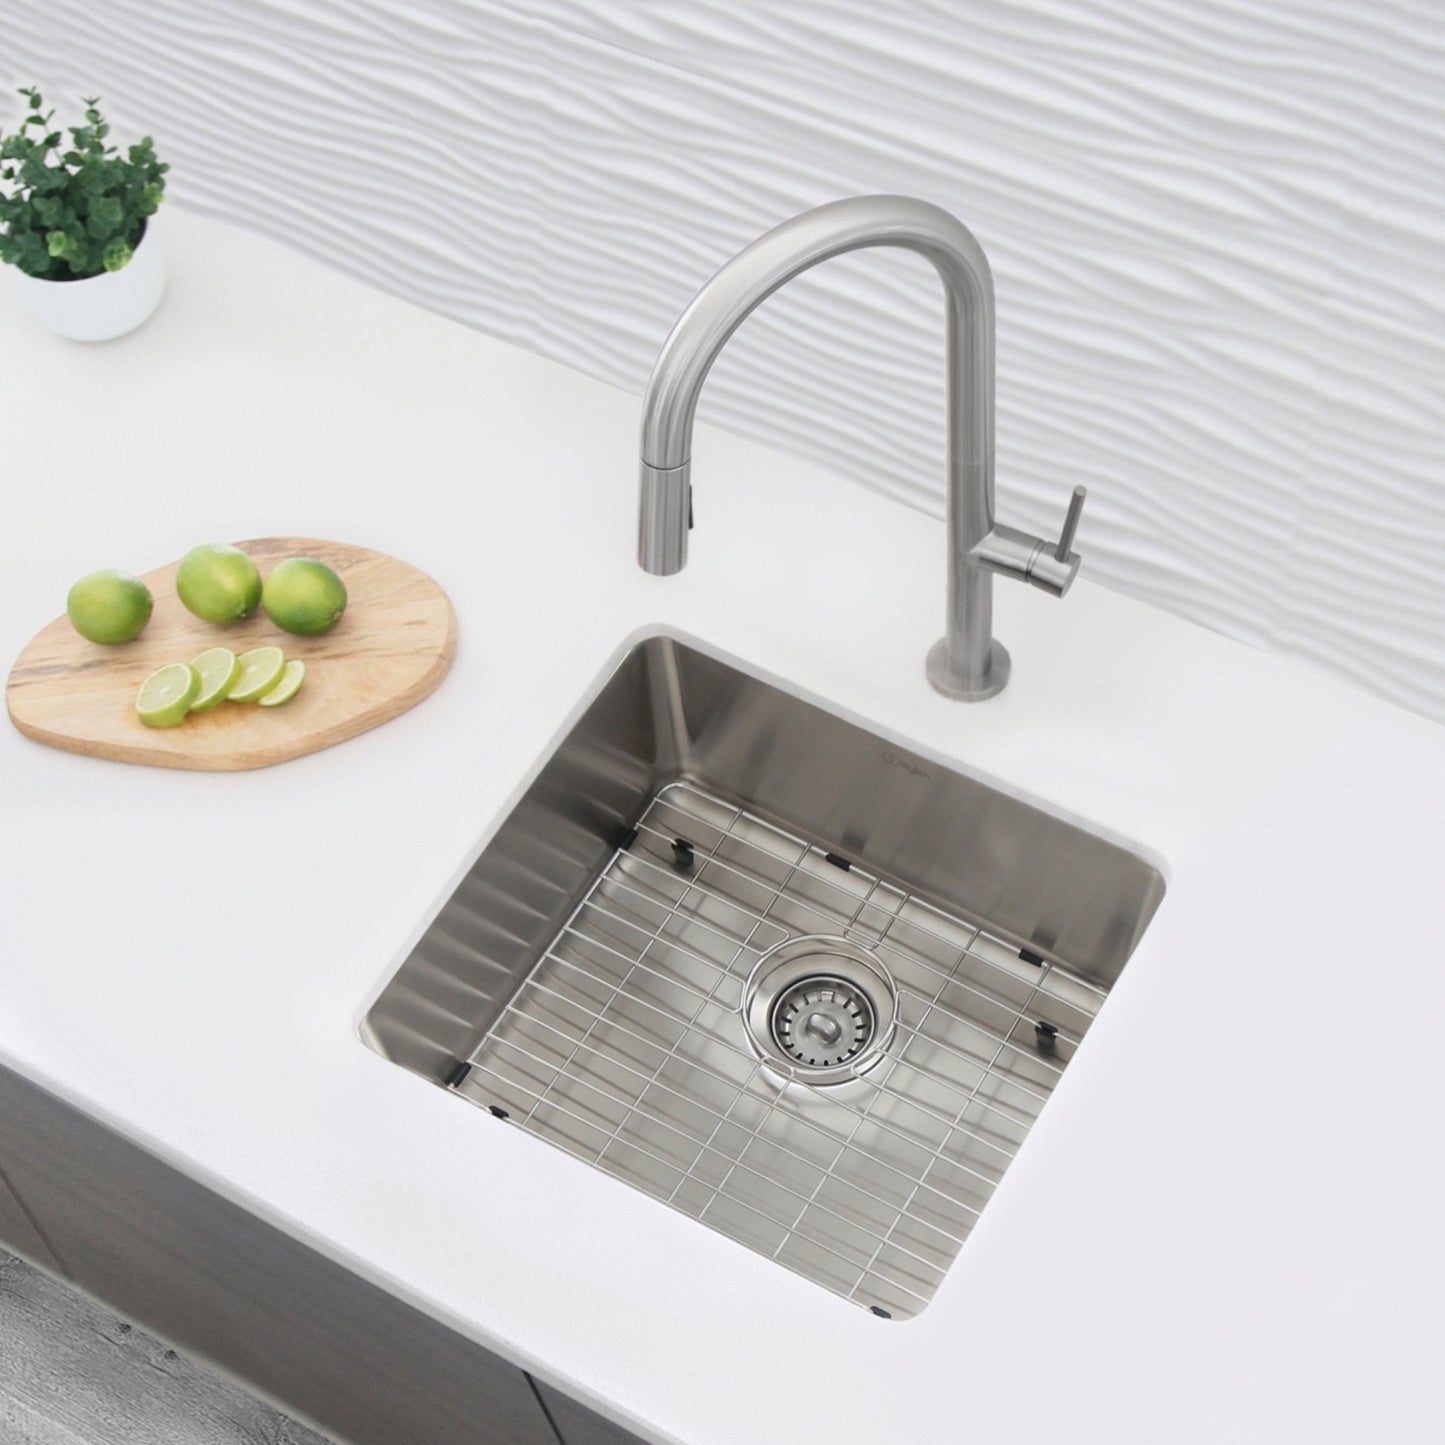 STYLISH 22" Bilbao Single Bowl Undermount and Drop-in Stainless Steel Kitchen Sink